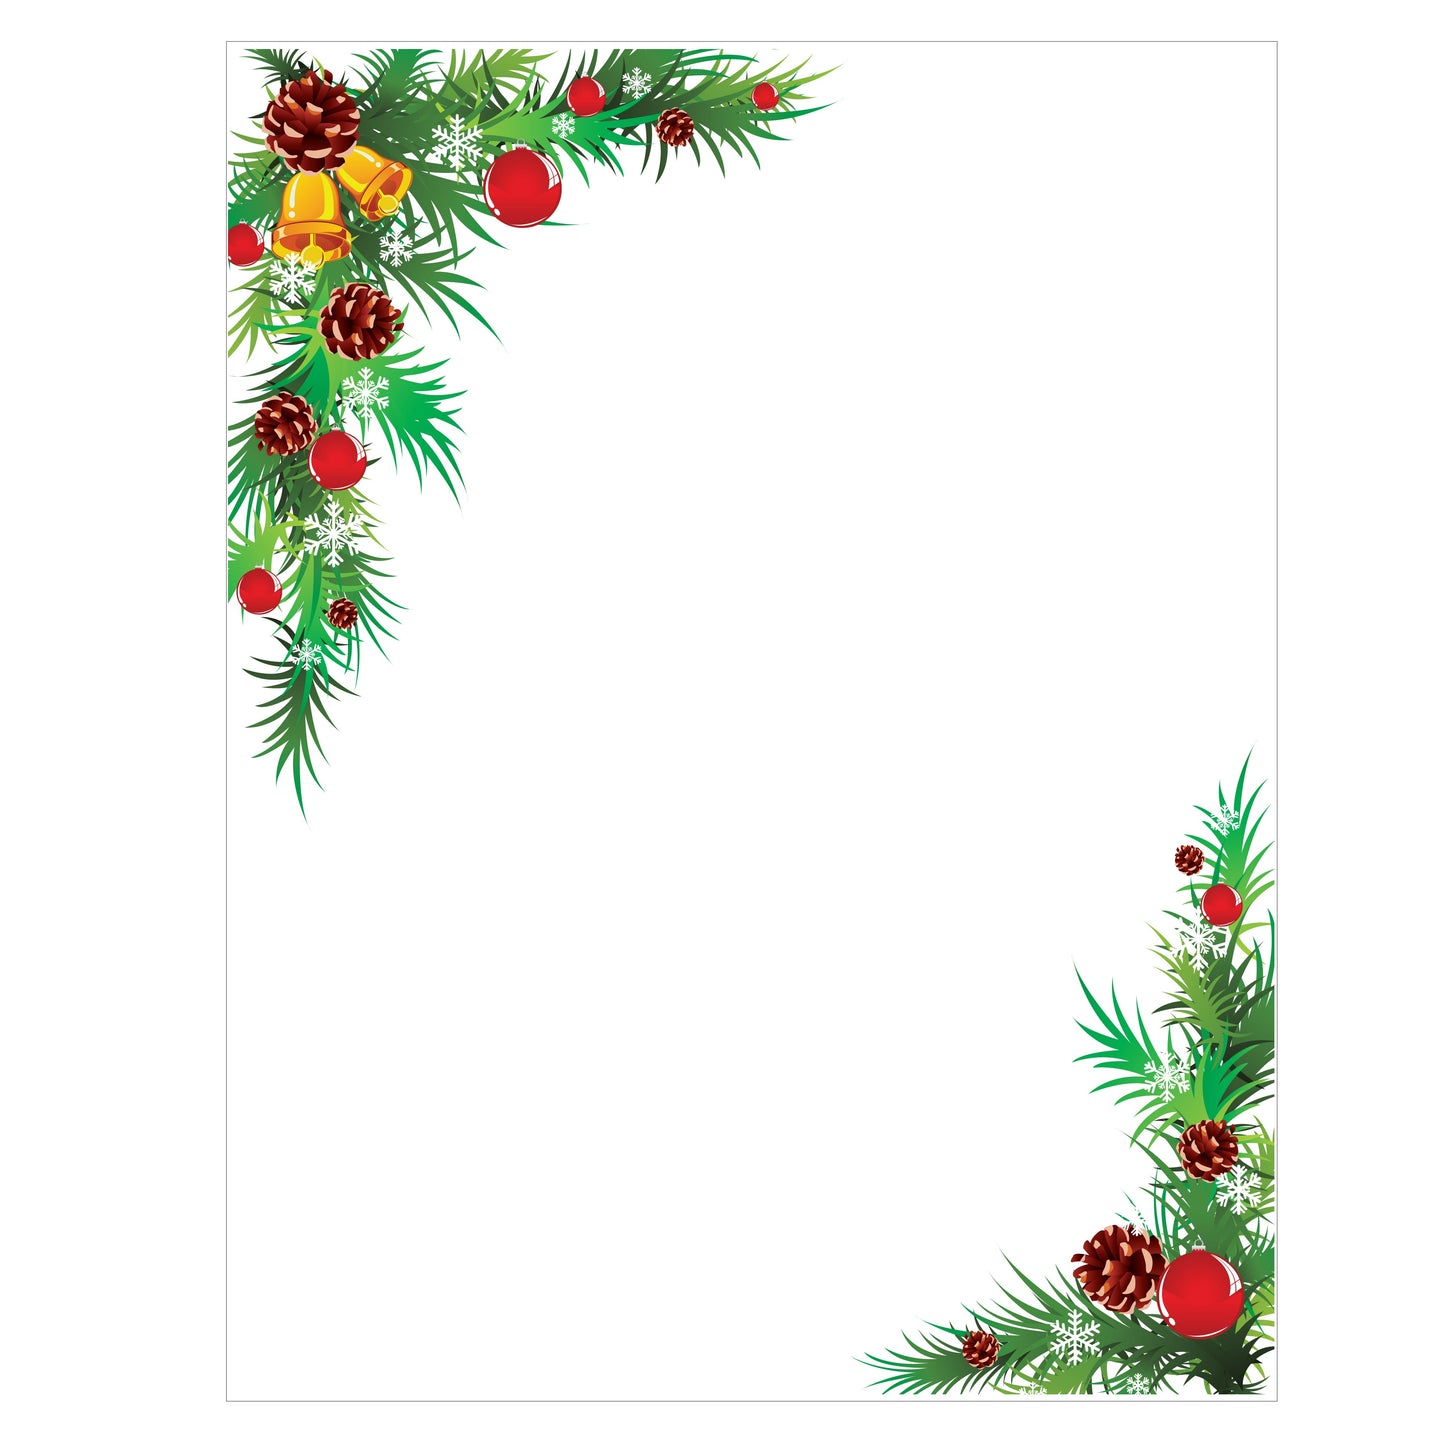 St. James® Holiday Collection, Holiday Wreath, 8.5 x 11", 24 lb, 25 sheets/pk